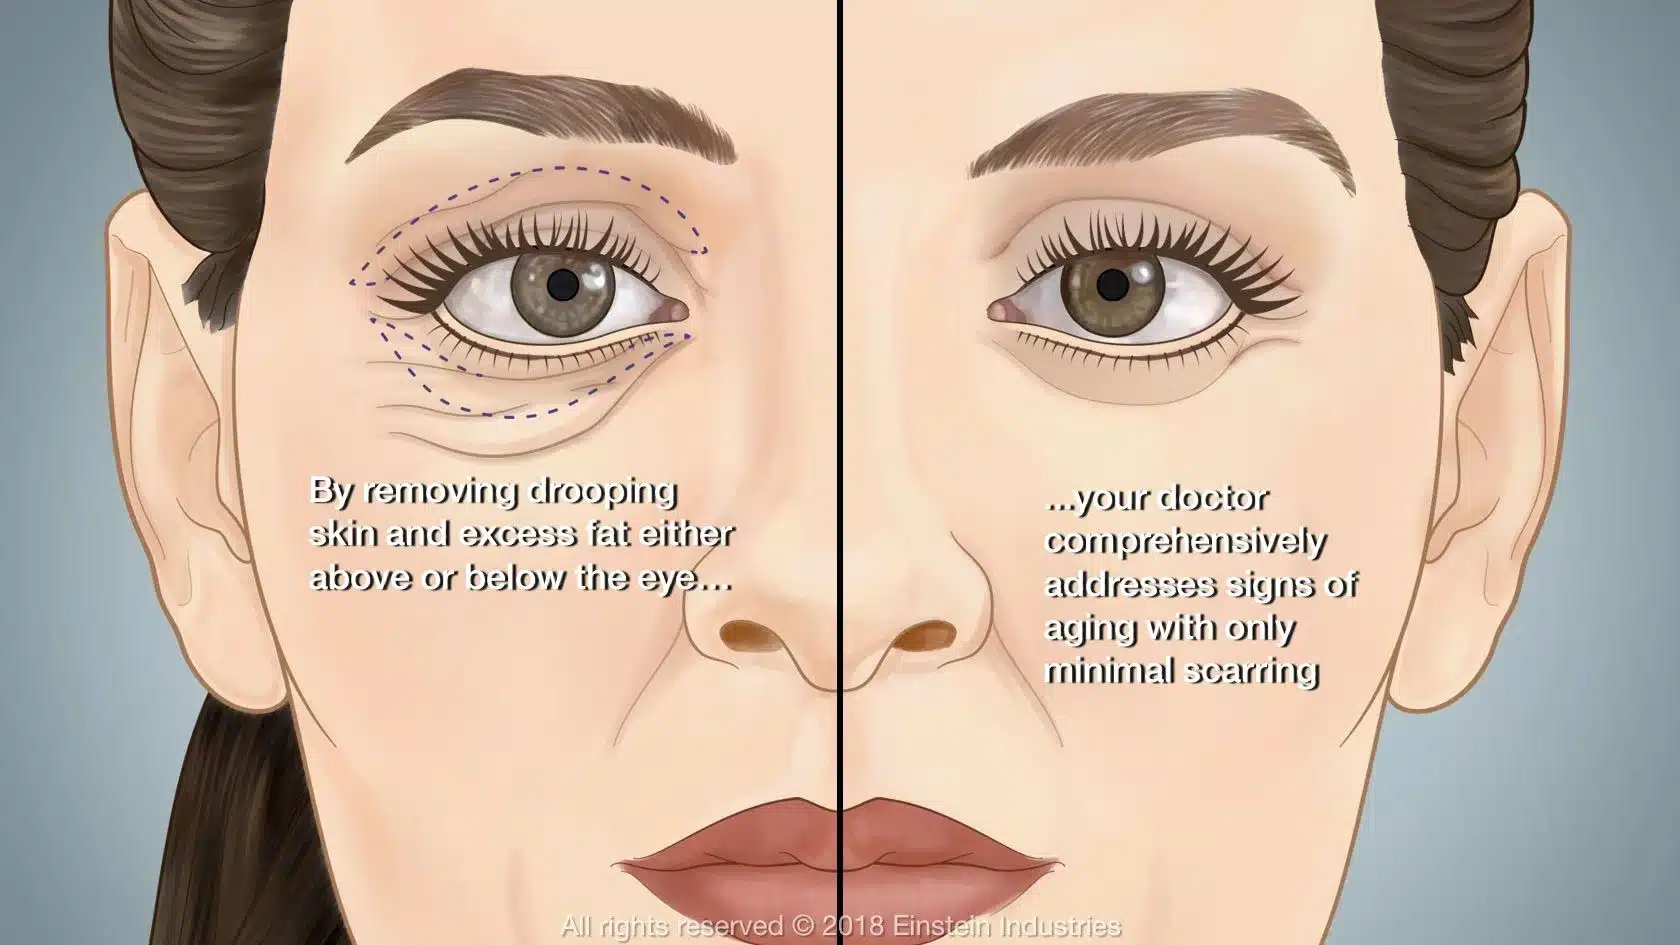 The first step in blepharoplasty involves administering anesthesia to ensure the patient's comfort during the procedure.